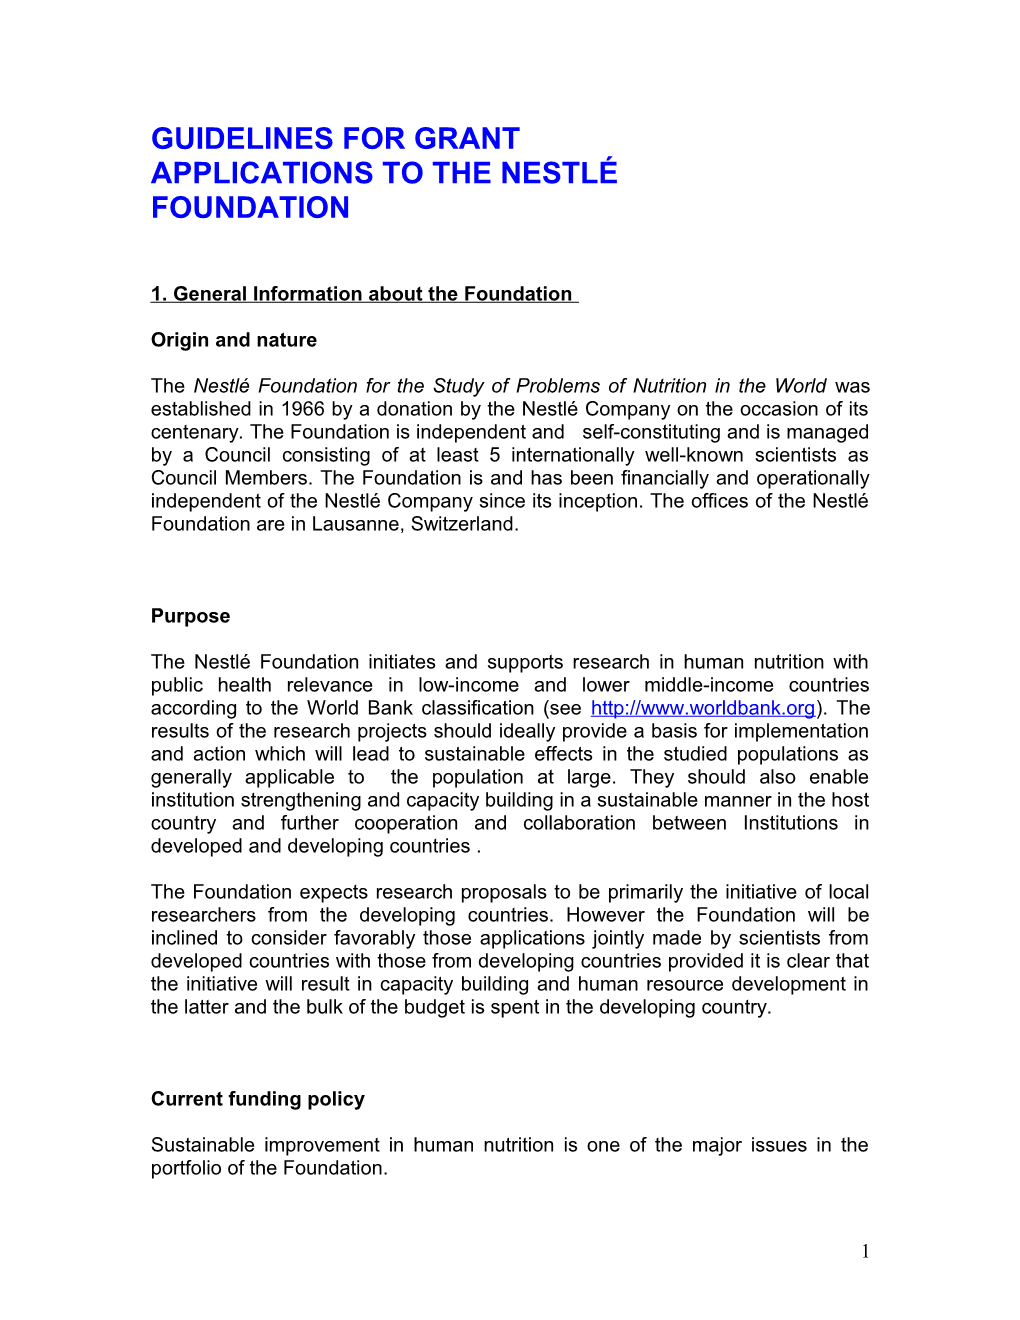 Guide for Grant Applications to the Nestlé Foundation